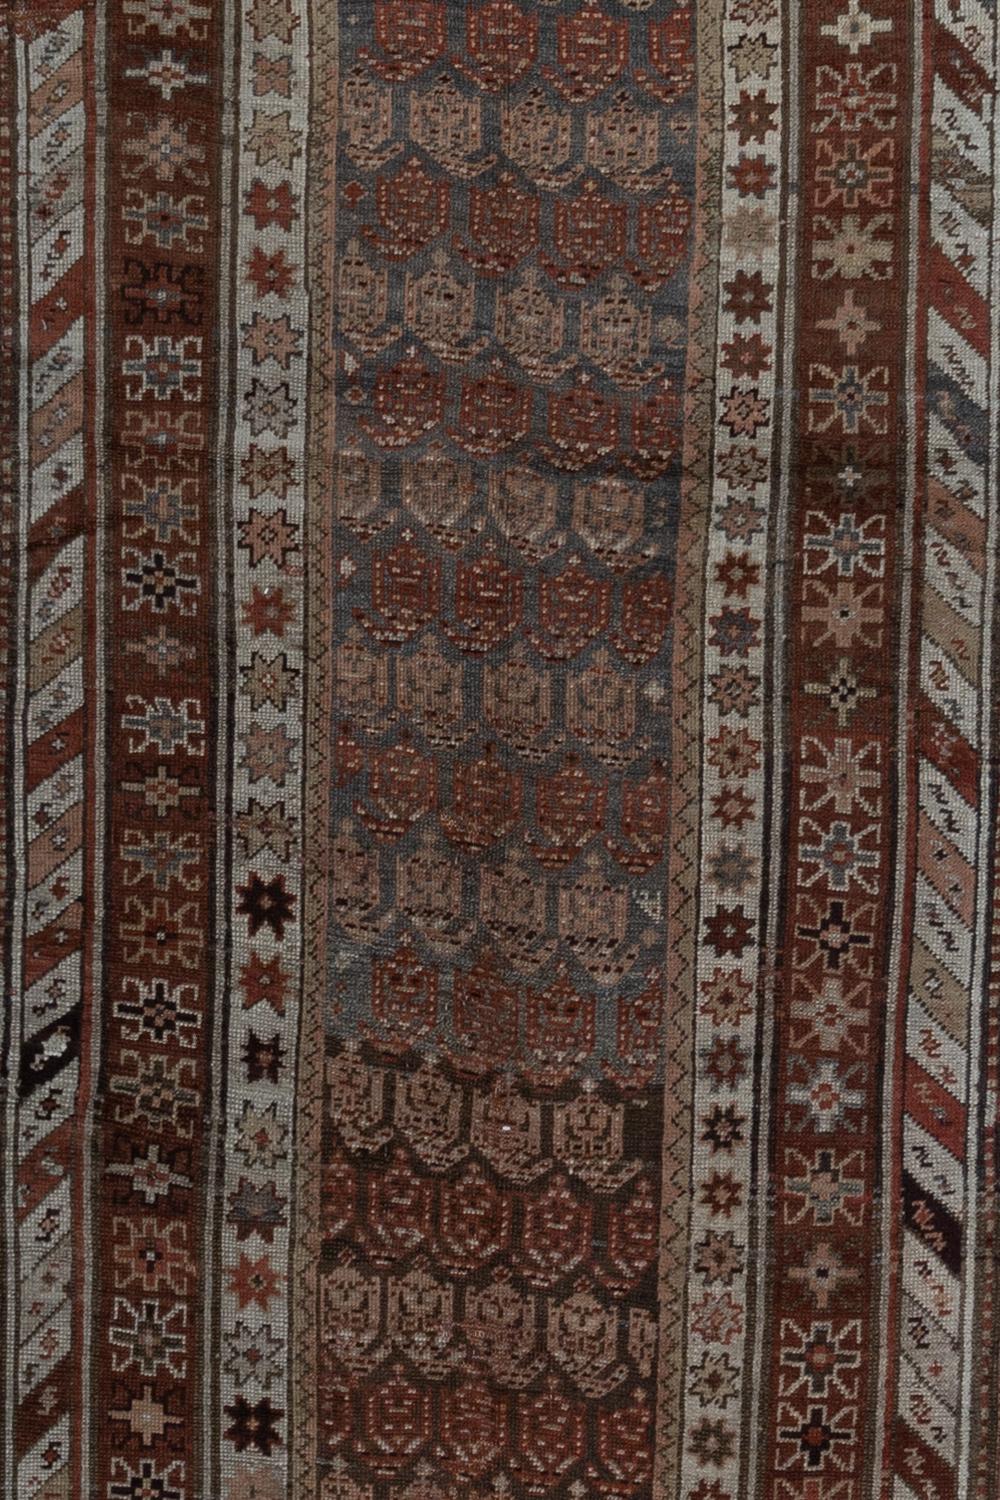 Age: early 1900's

Pile: Low-medium 

Wear Notes: 0

Material: Wool on wool

Antique Persian runner with a soft wool pile and nicely saturated jewel tones. Good condition.

Vintage rugs are made by hand over the course of months, sometimes